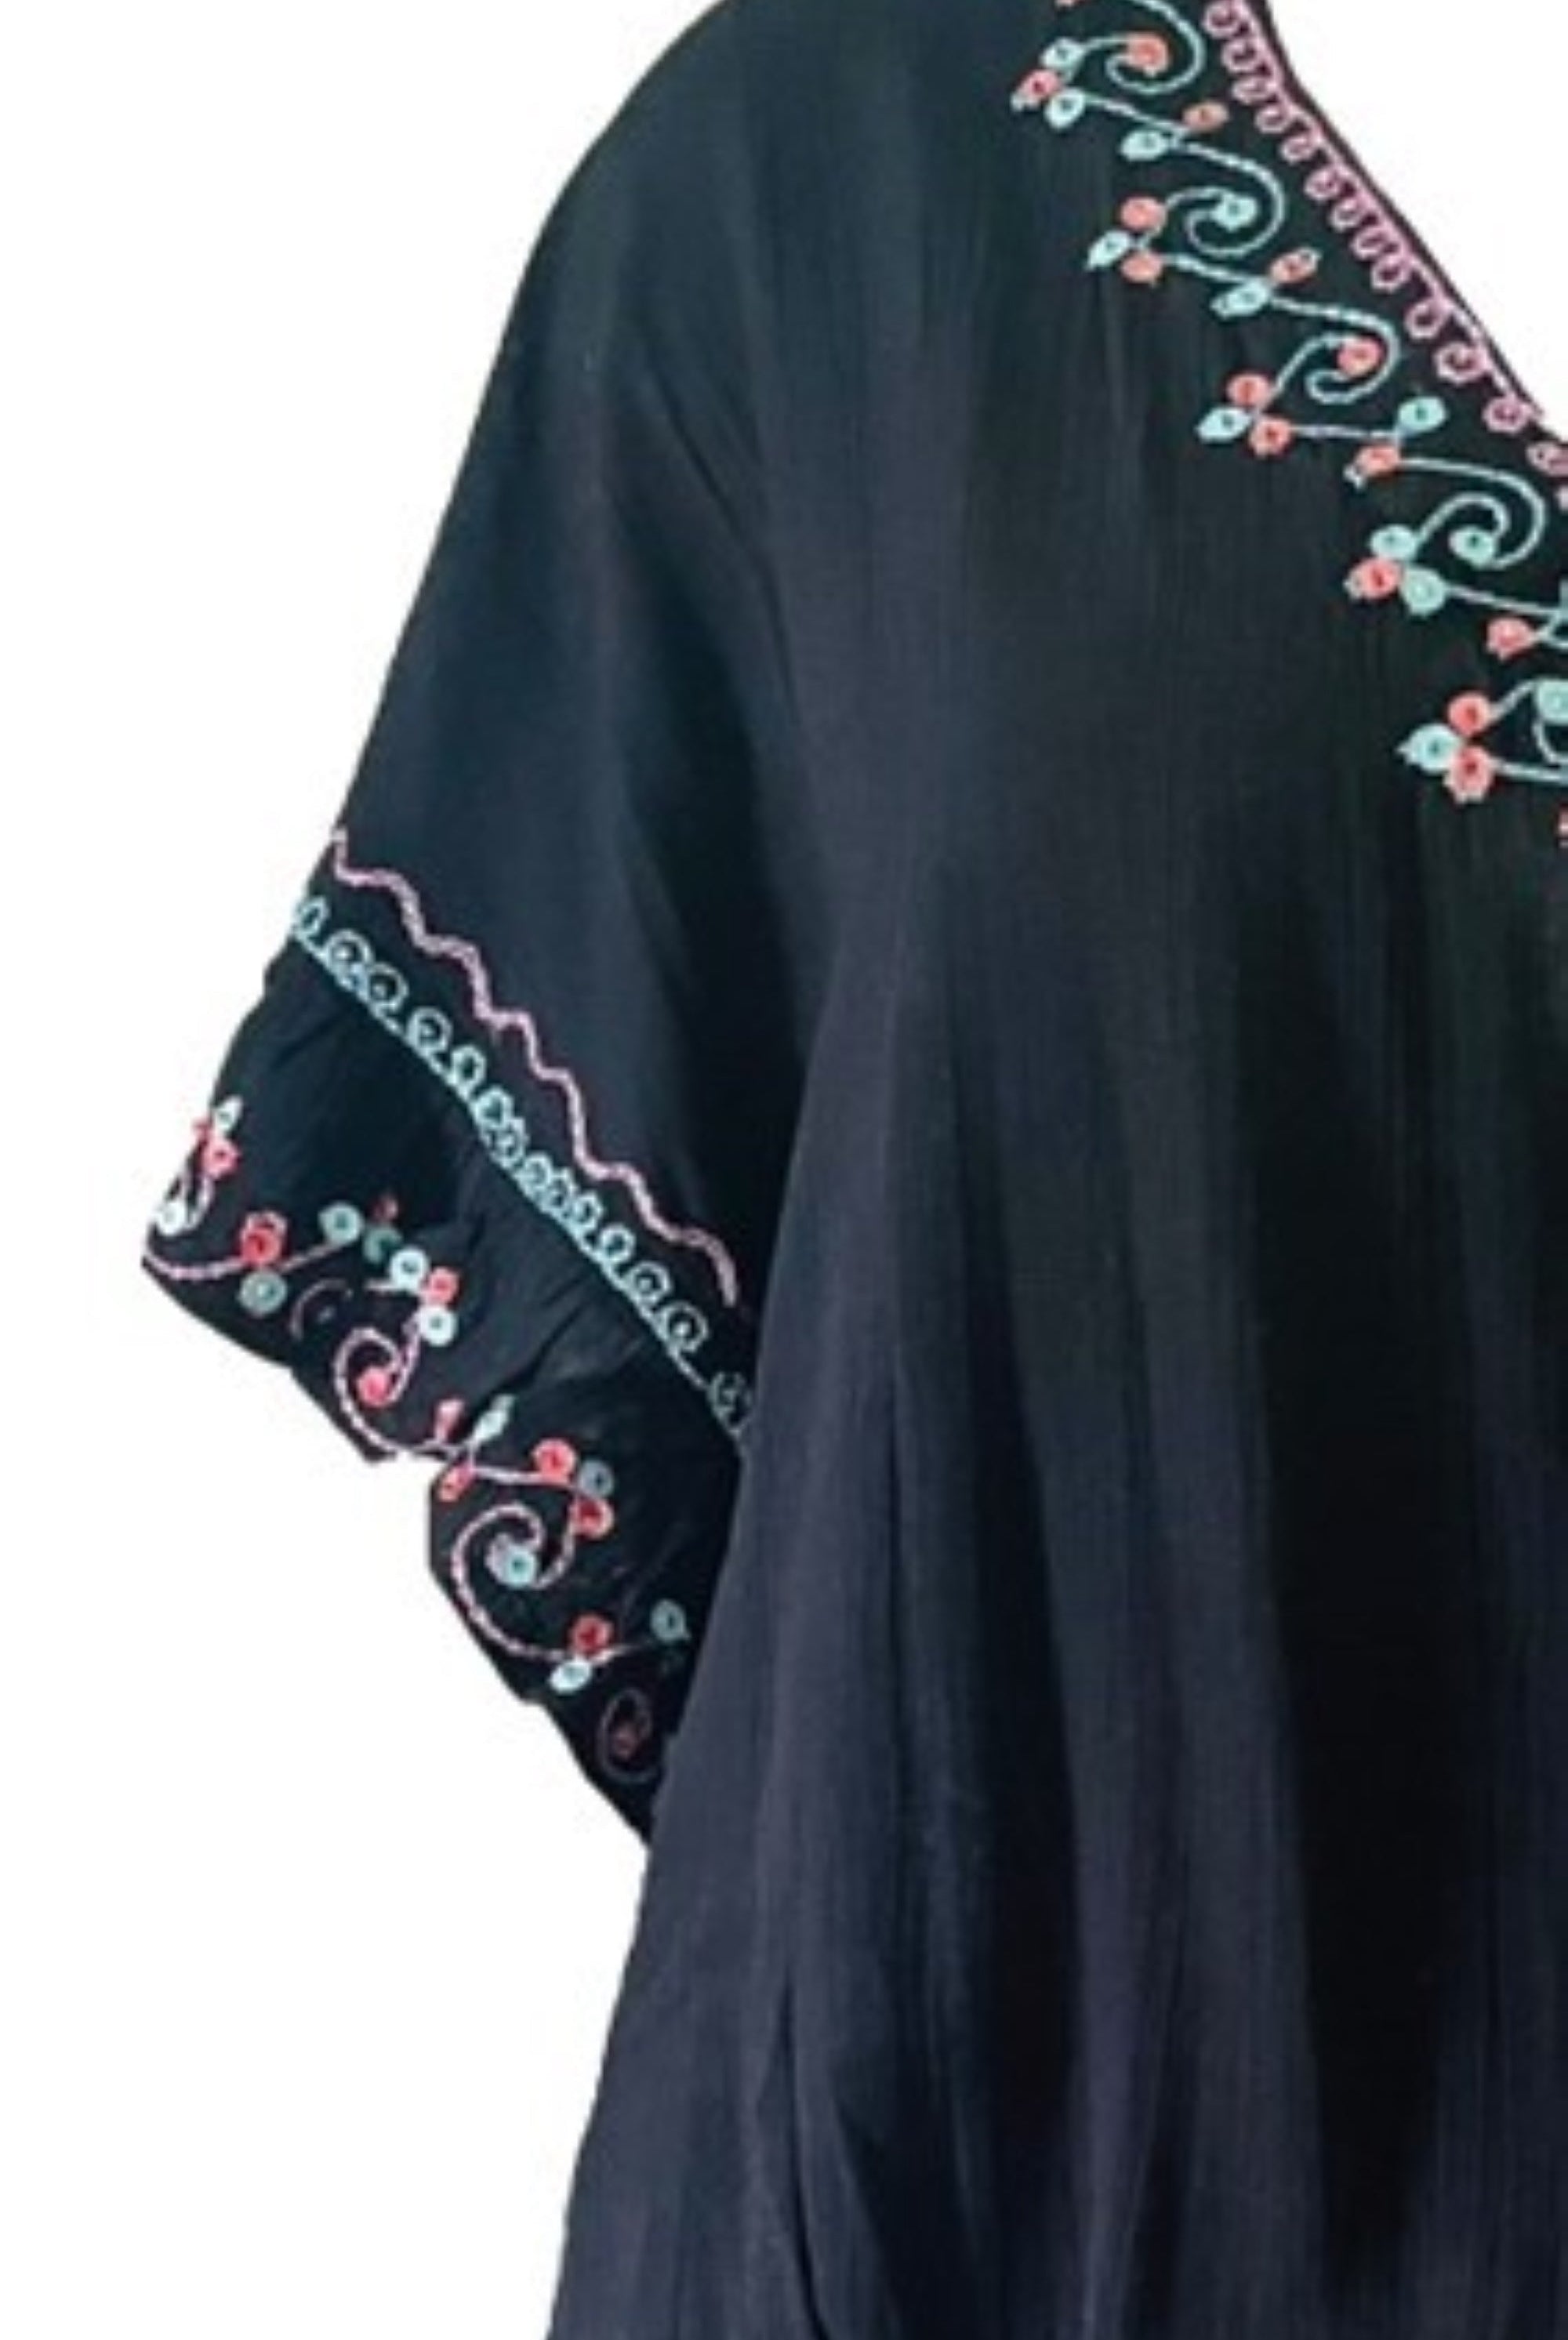 Black cotton kaftan dress to wear on holiday by Lindsey Brown 